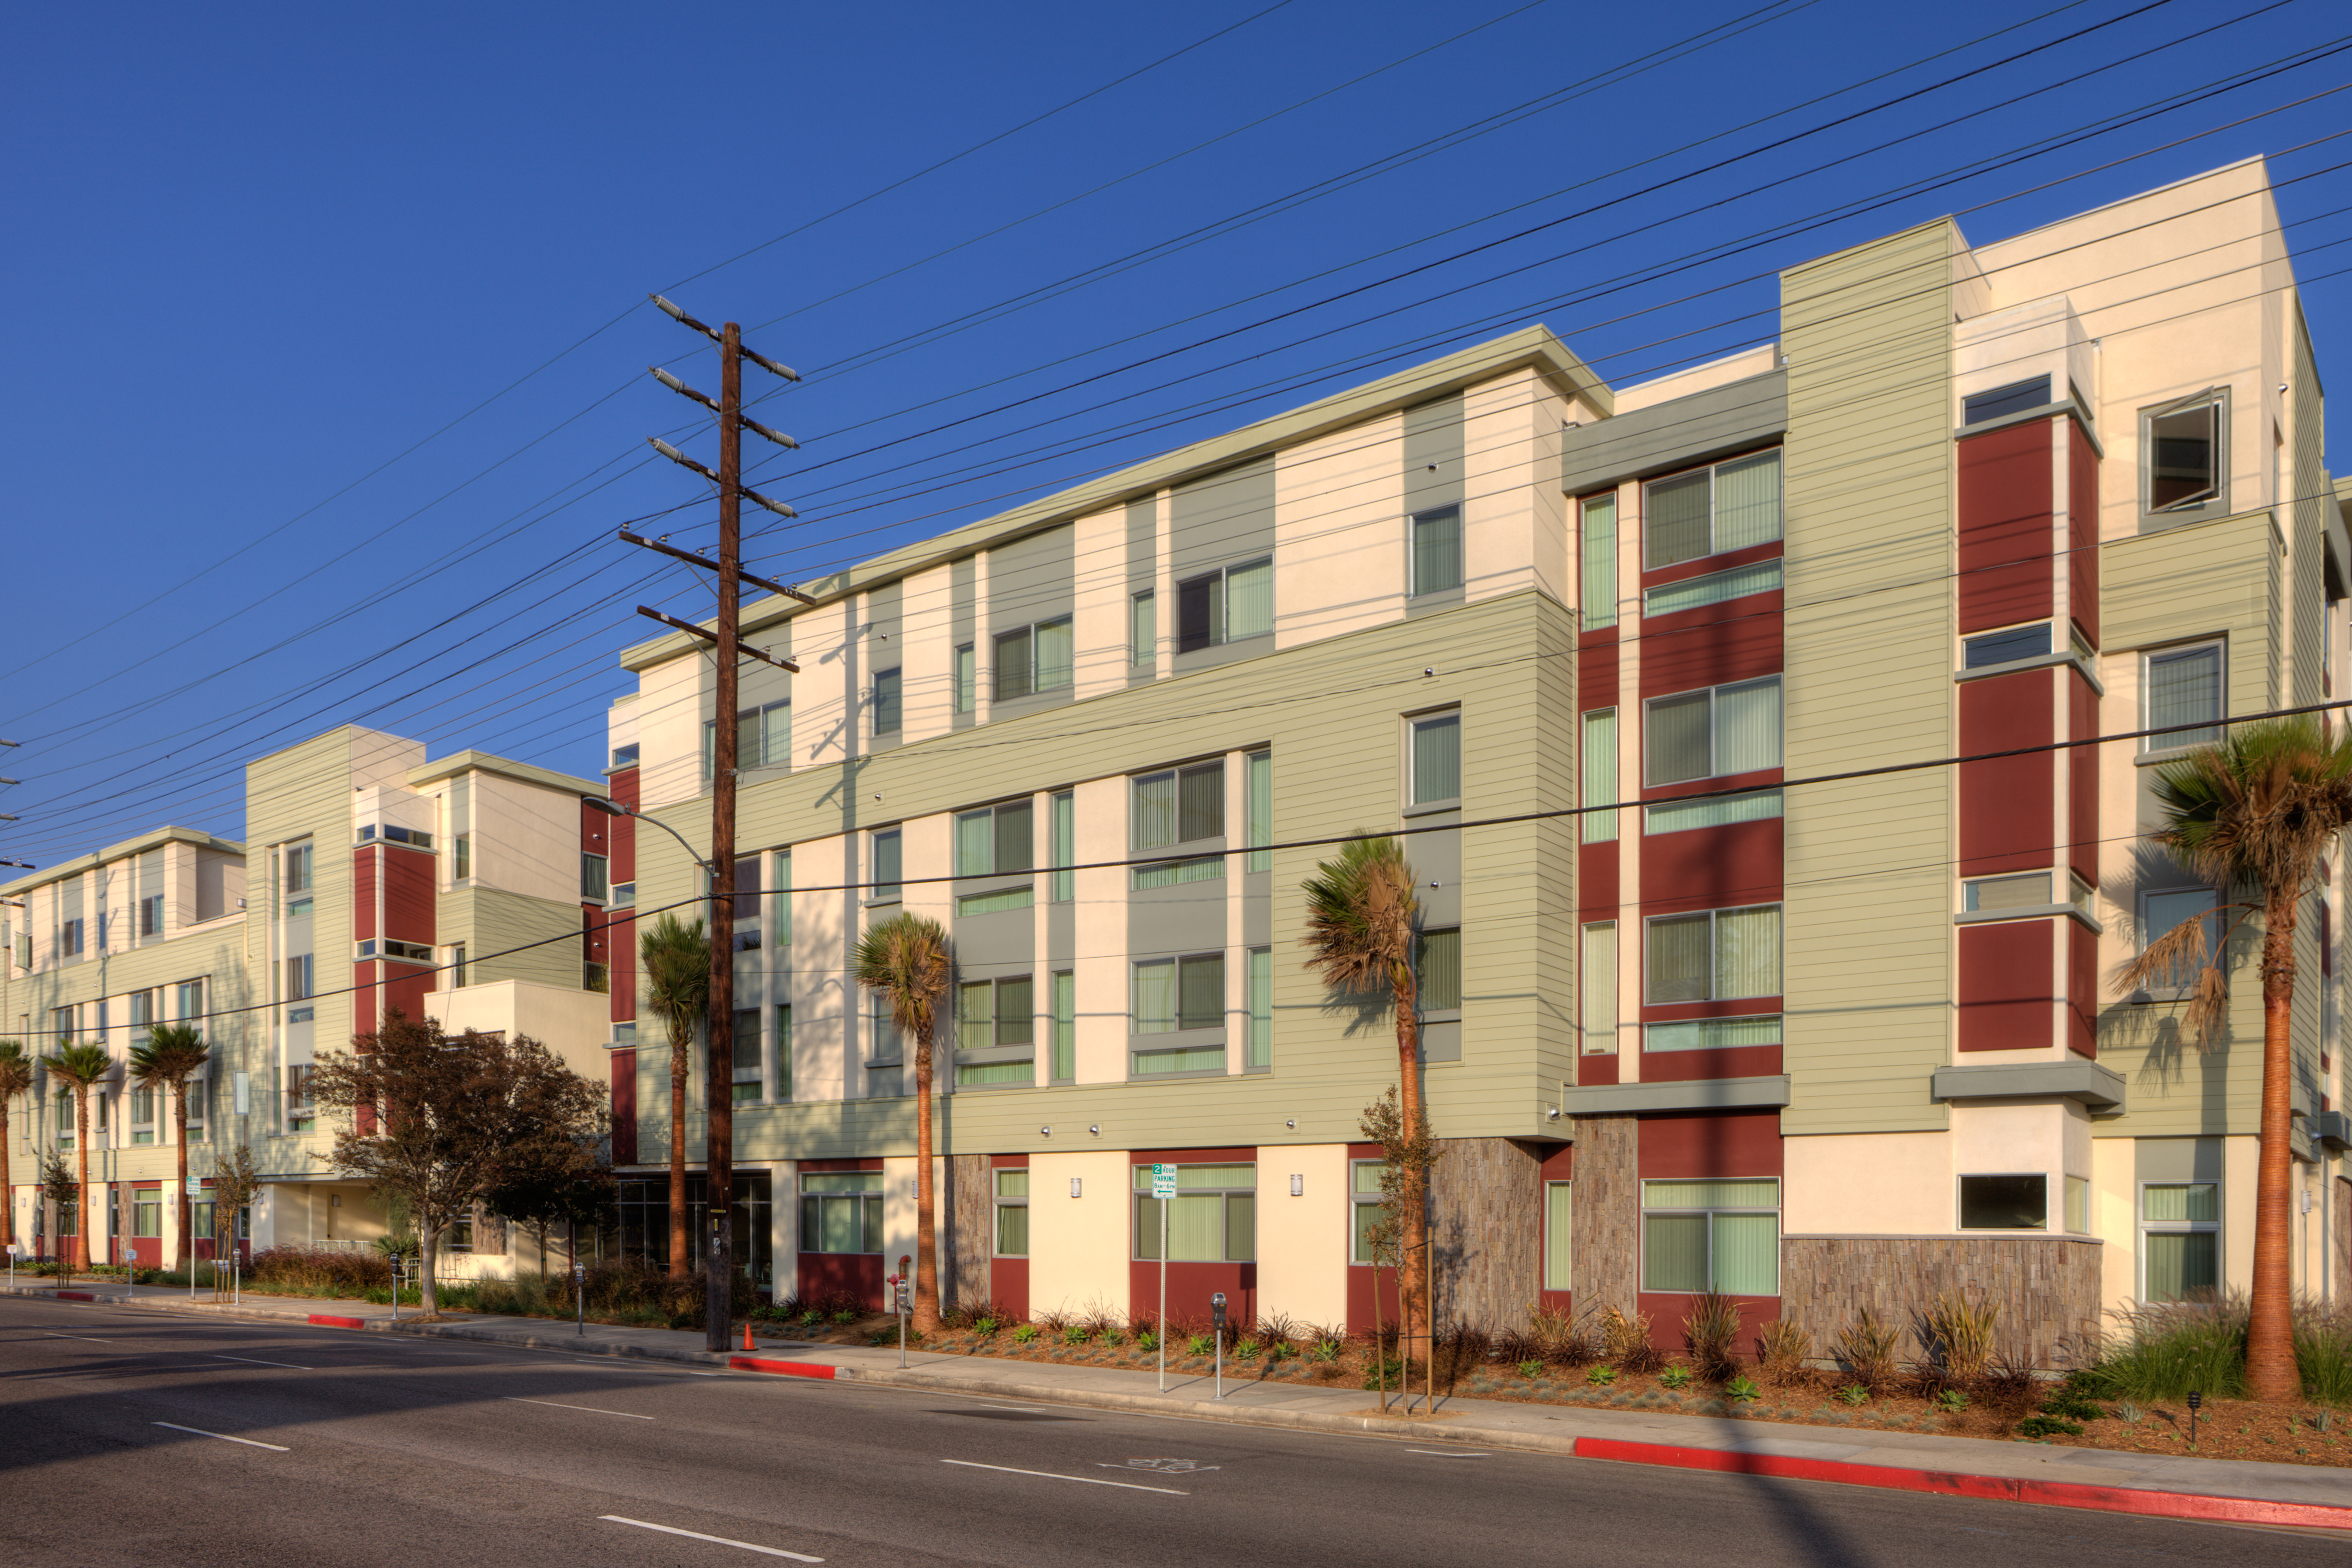 Street view of a four story apartment building in multiple colors